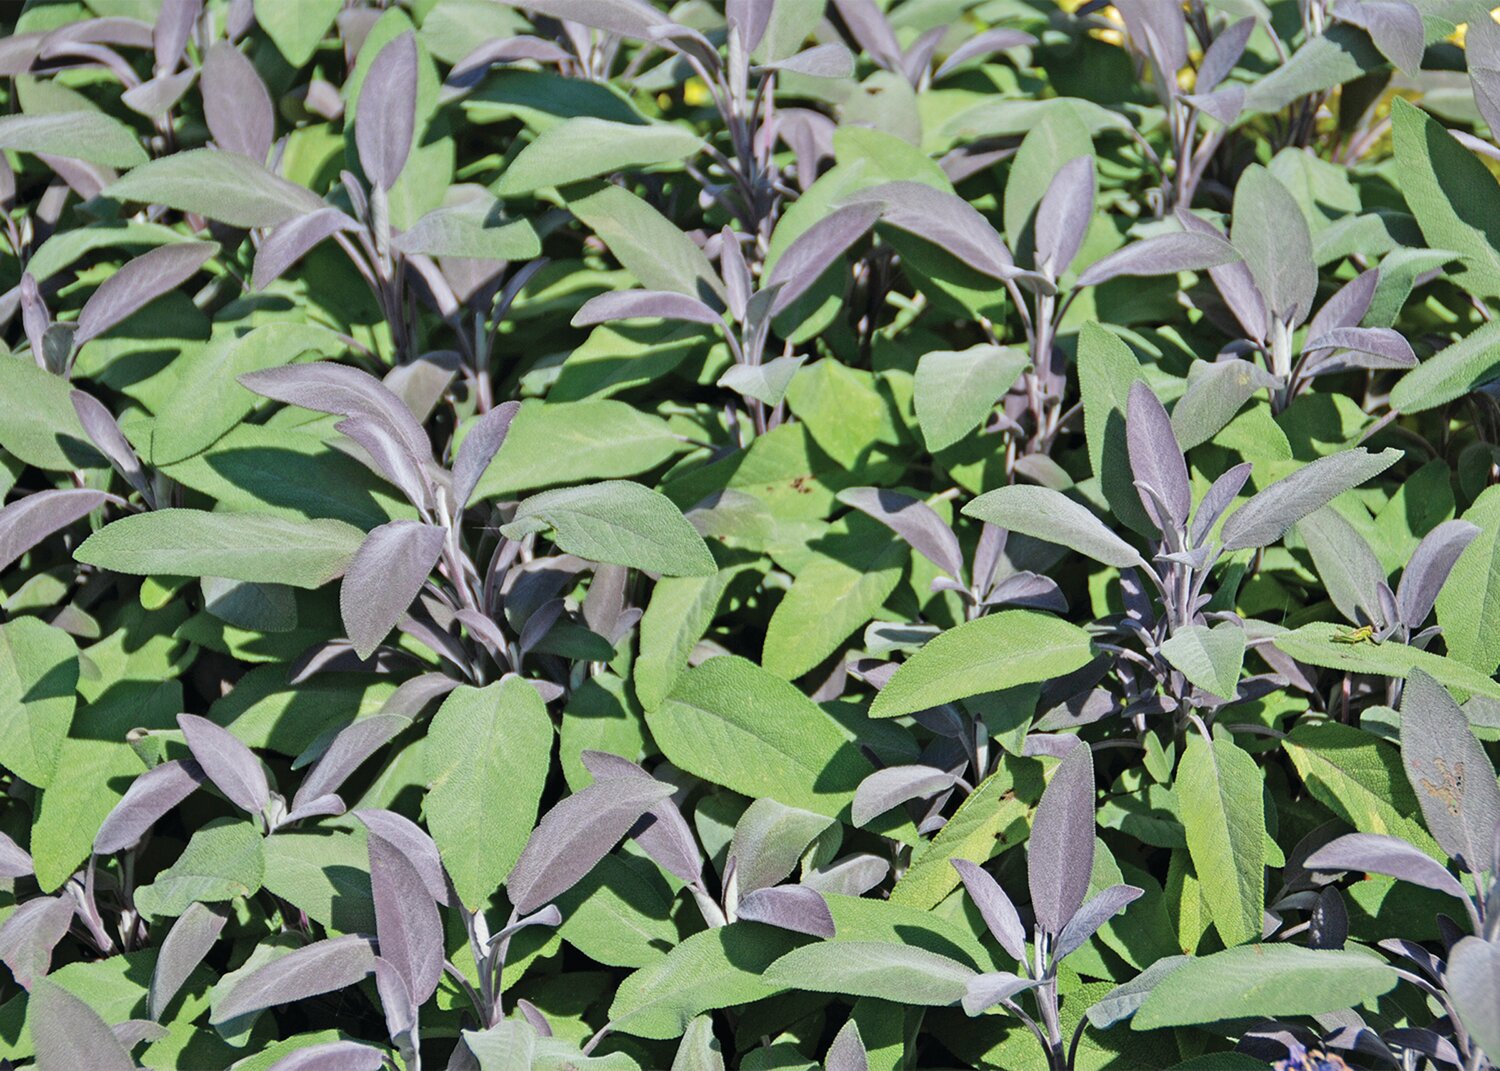 Sage leaves can be brewed into tea to soothe sore, irritated throats.